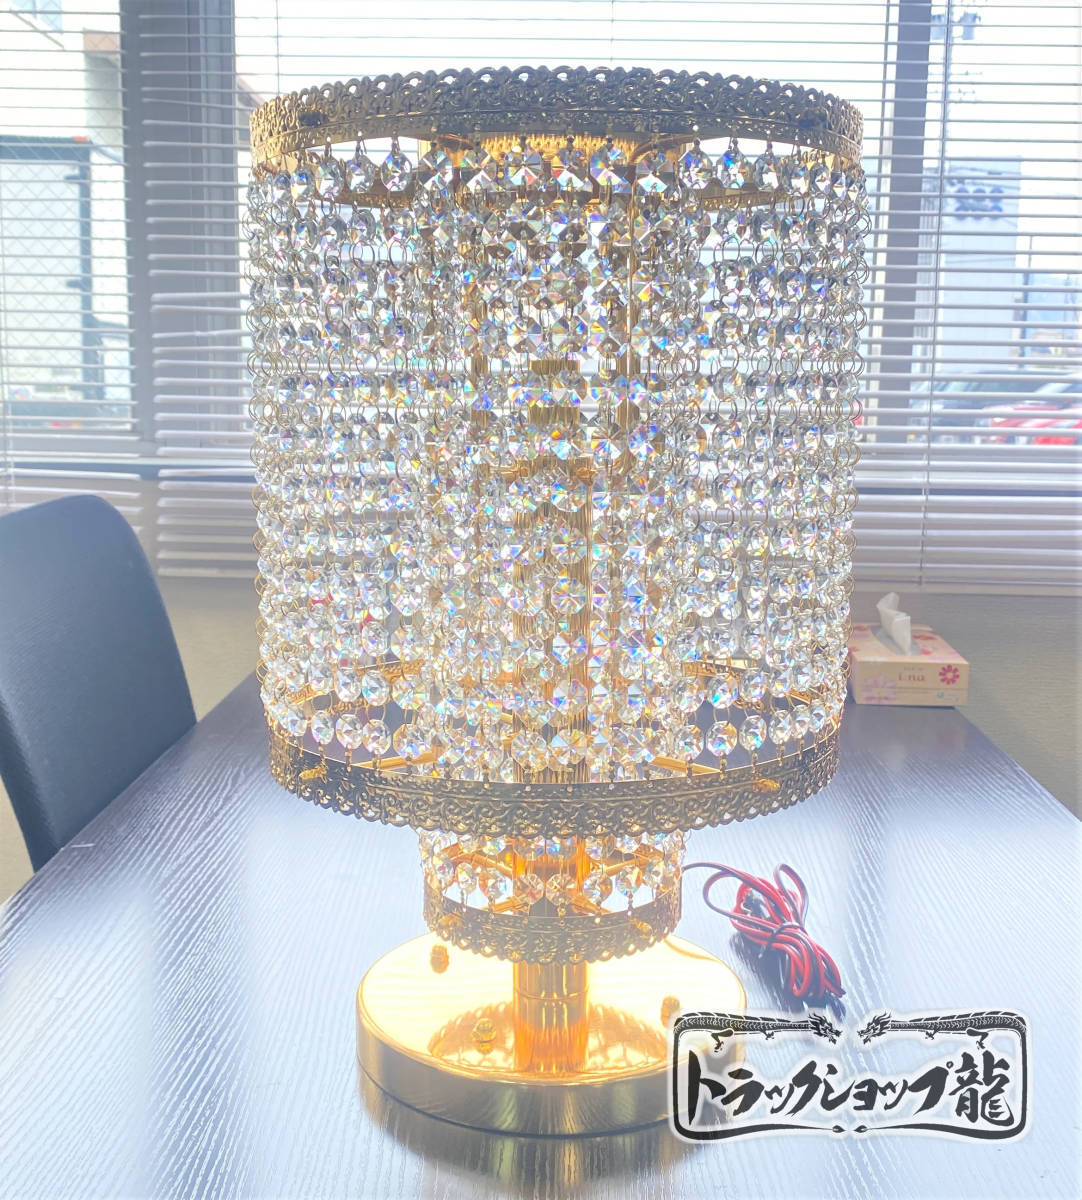  high quality jpy pillar type stand chandelier large full Gold plating ok tagon16 surface beads salon bus / deco truck / retro / man. castle / gold . mountain C1675S